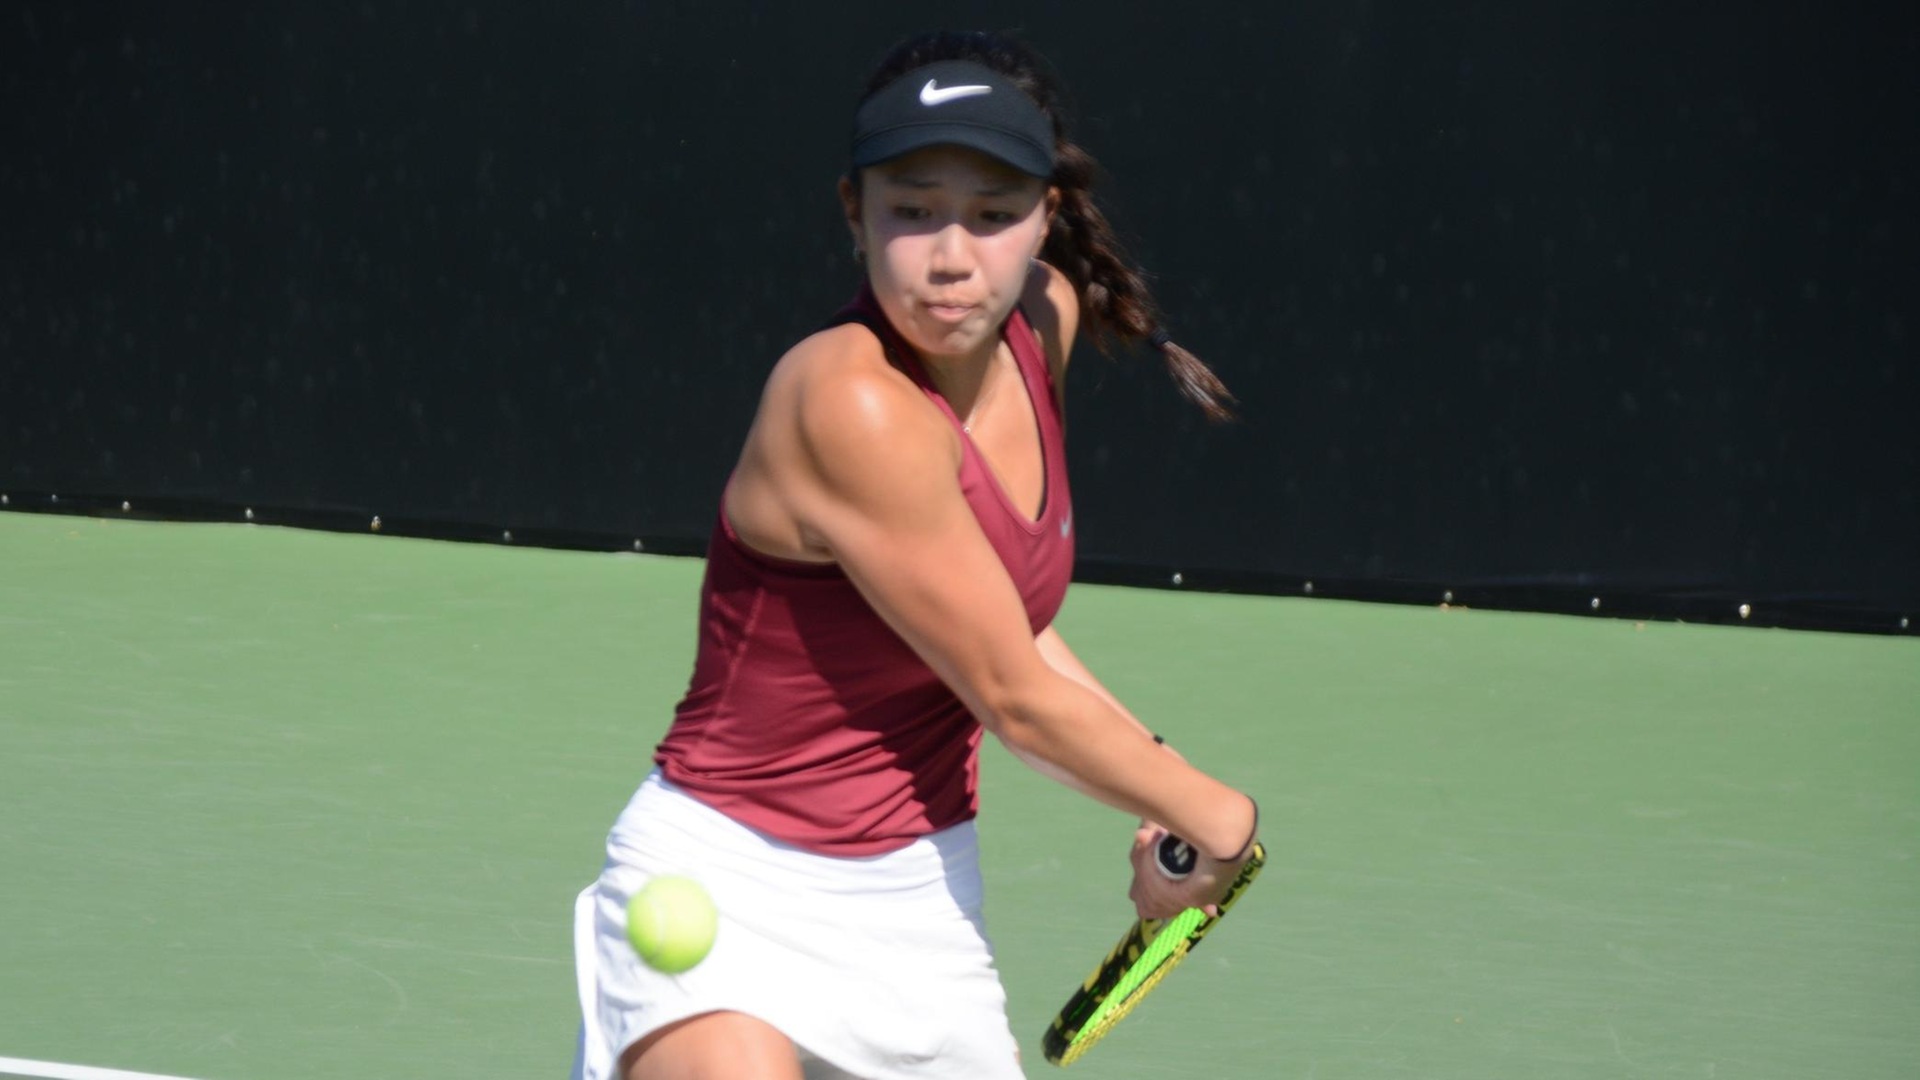 Sydney Lee had wins in both singles and doubles